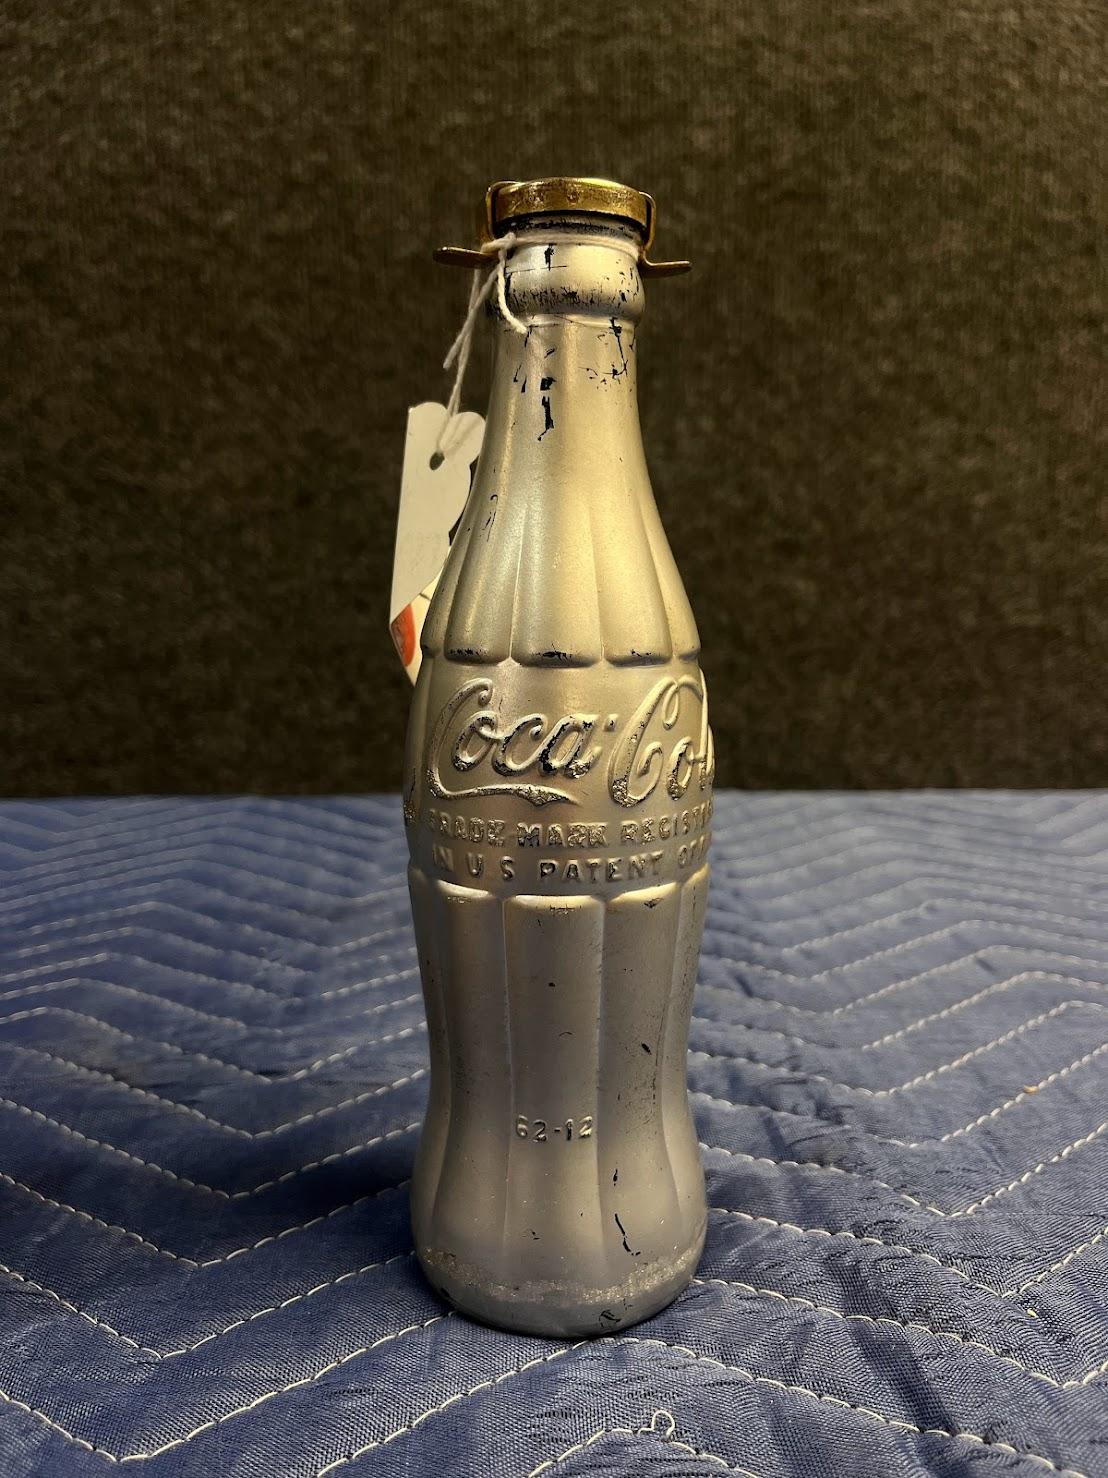 ANDY WARHOL (1928-1987)

Coca-Cola glass bottle, metal bottle stopper and spray paint. Signed with initials by the artist in black ink ‘A. W.’ Executed in 1967.